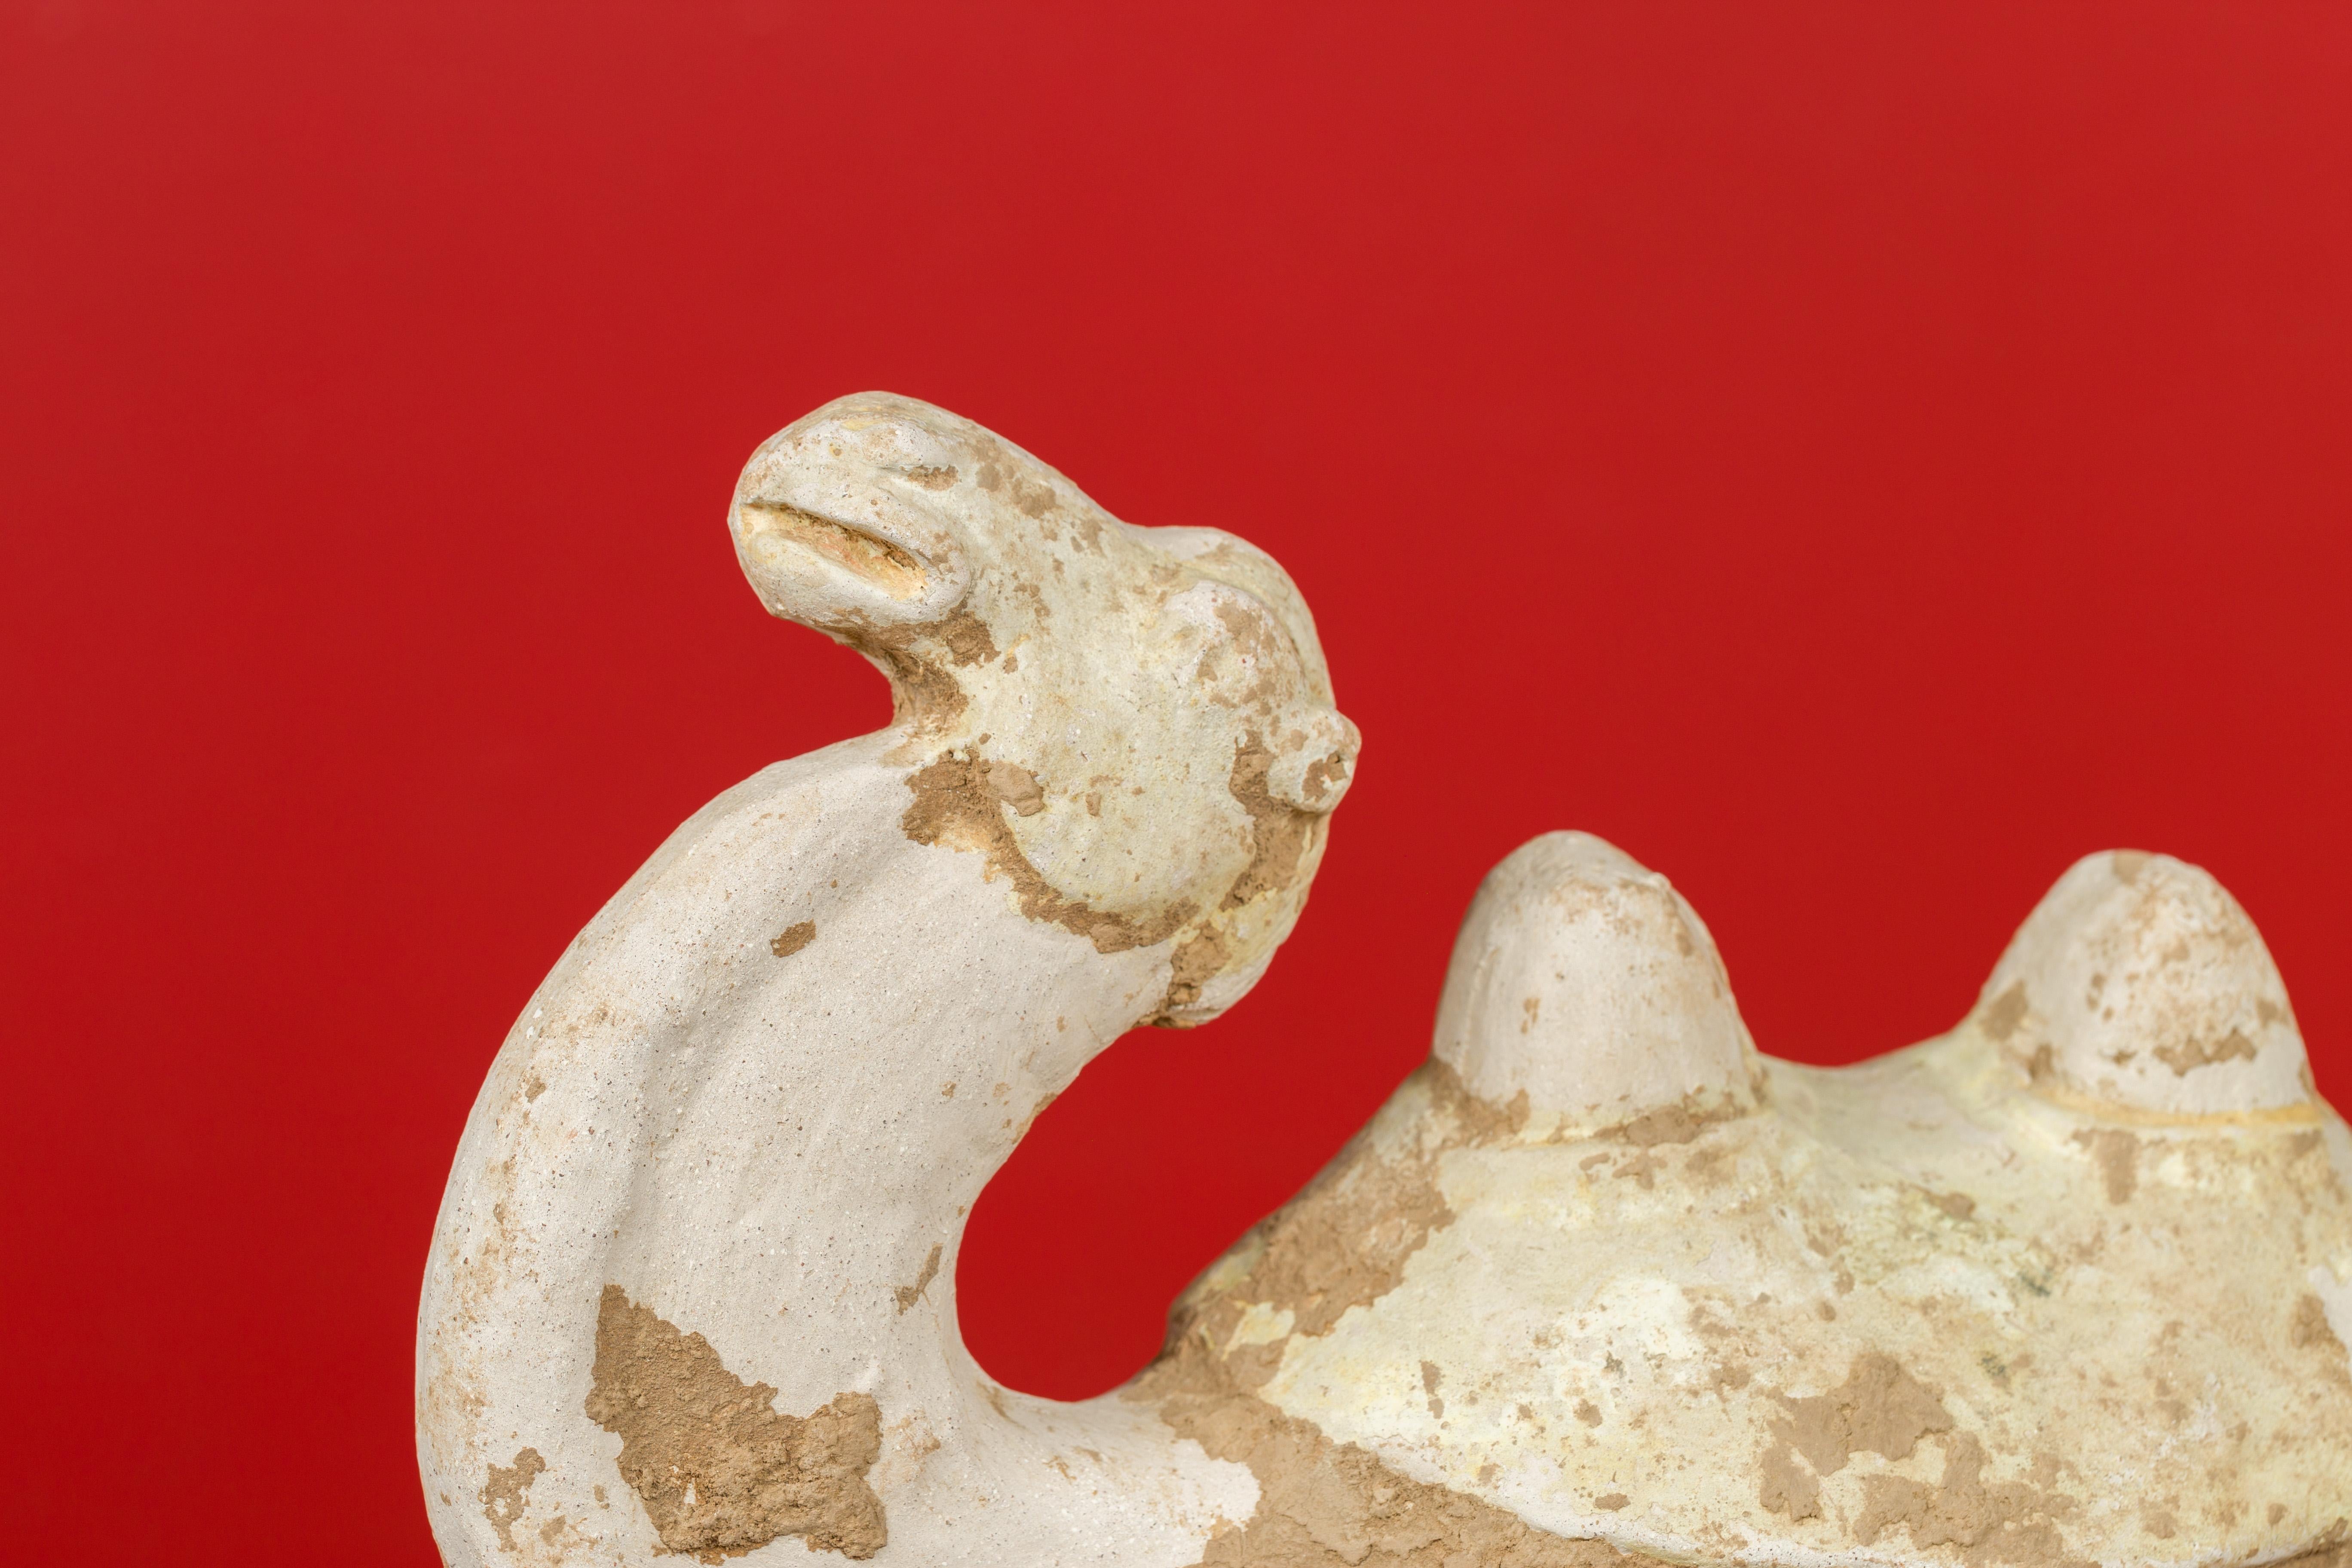 18th Century and Earlier Han Dynasty Chinese Mingqi Terracotta Camel with Mineral Deposits 202 BC-200 AD 